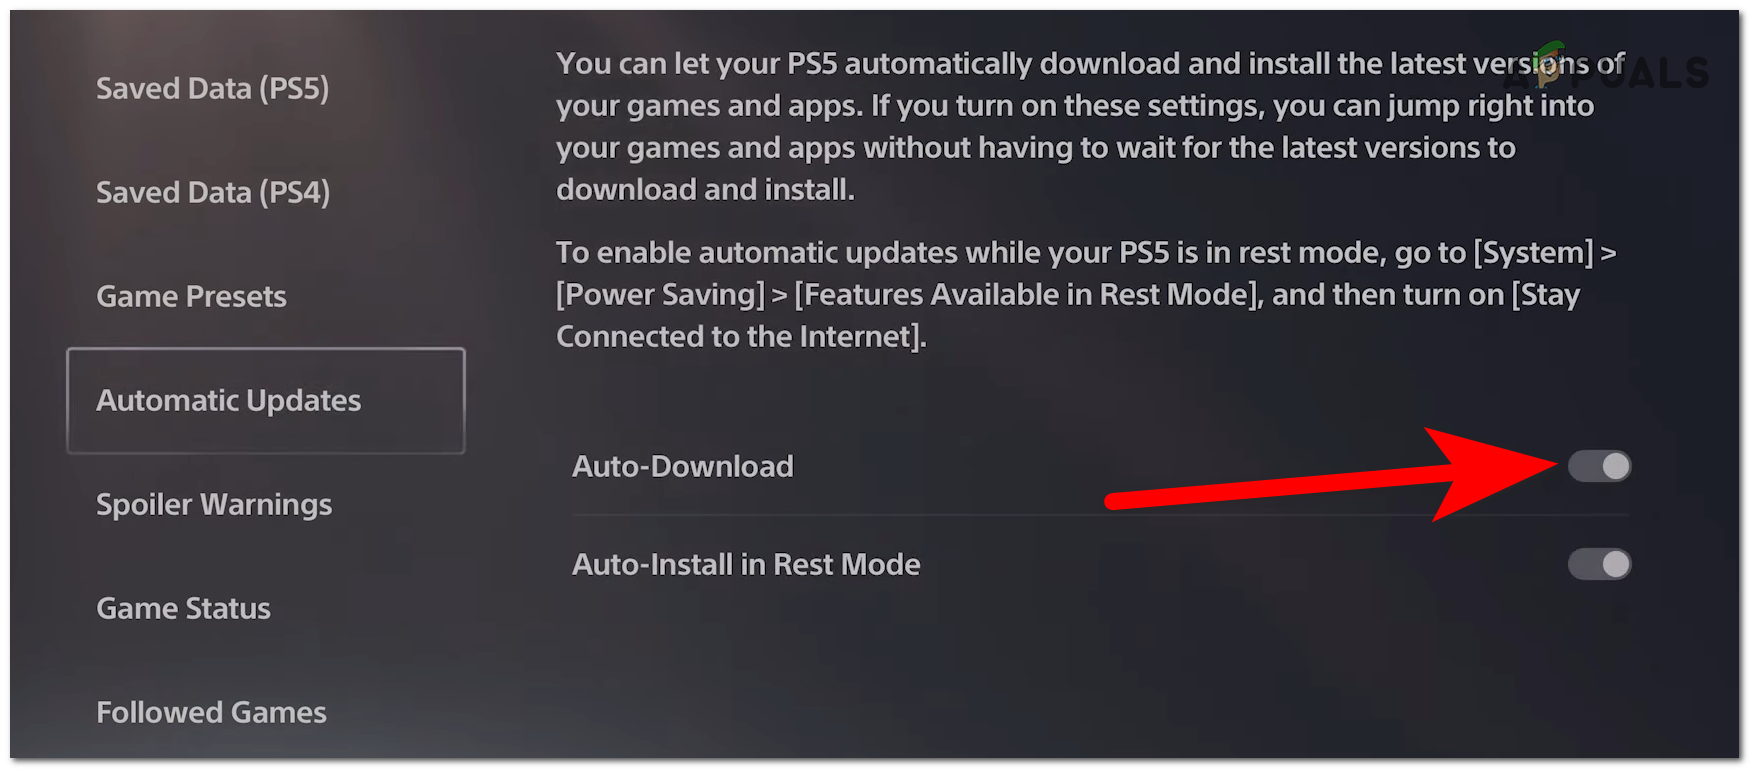 Turning off the Auto-Download feature